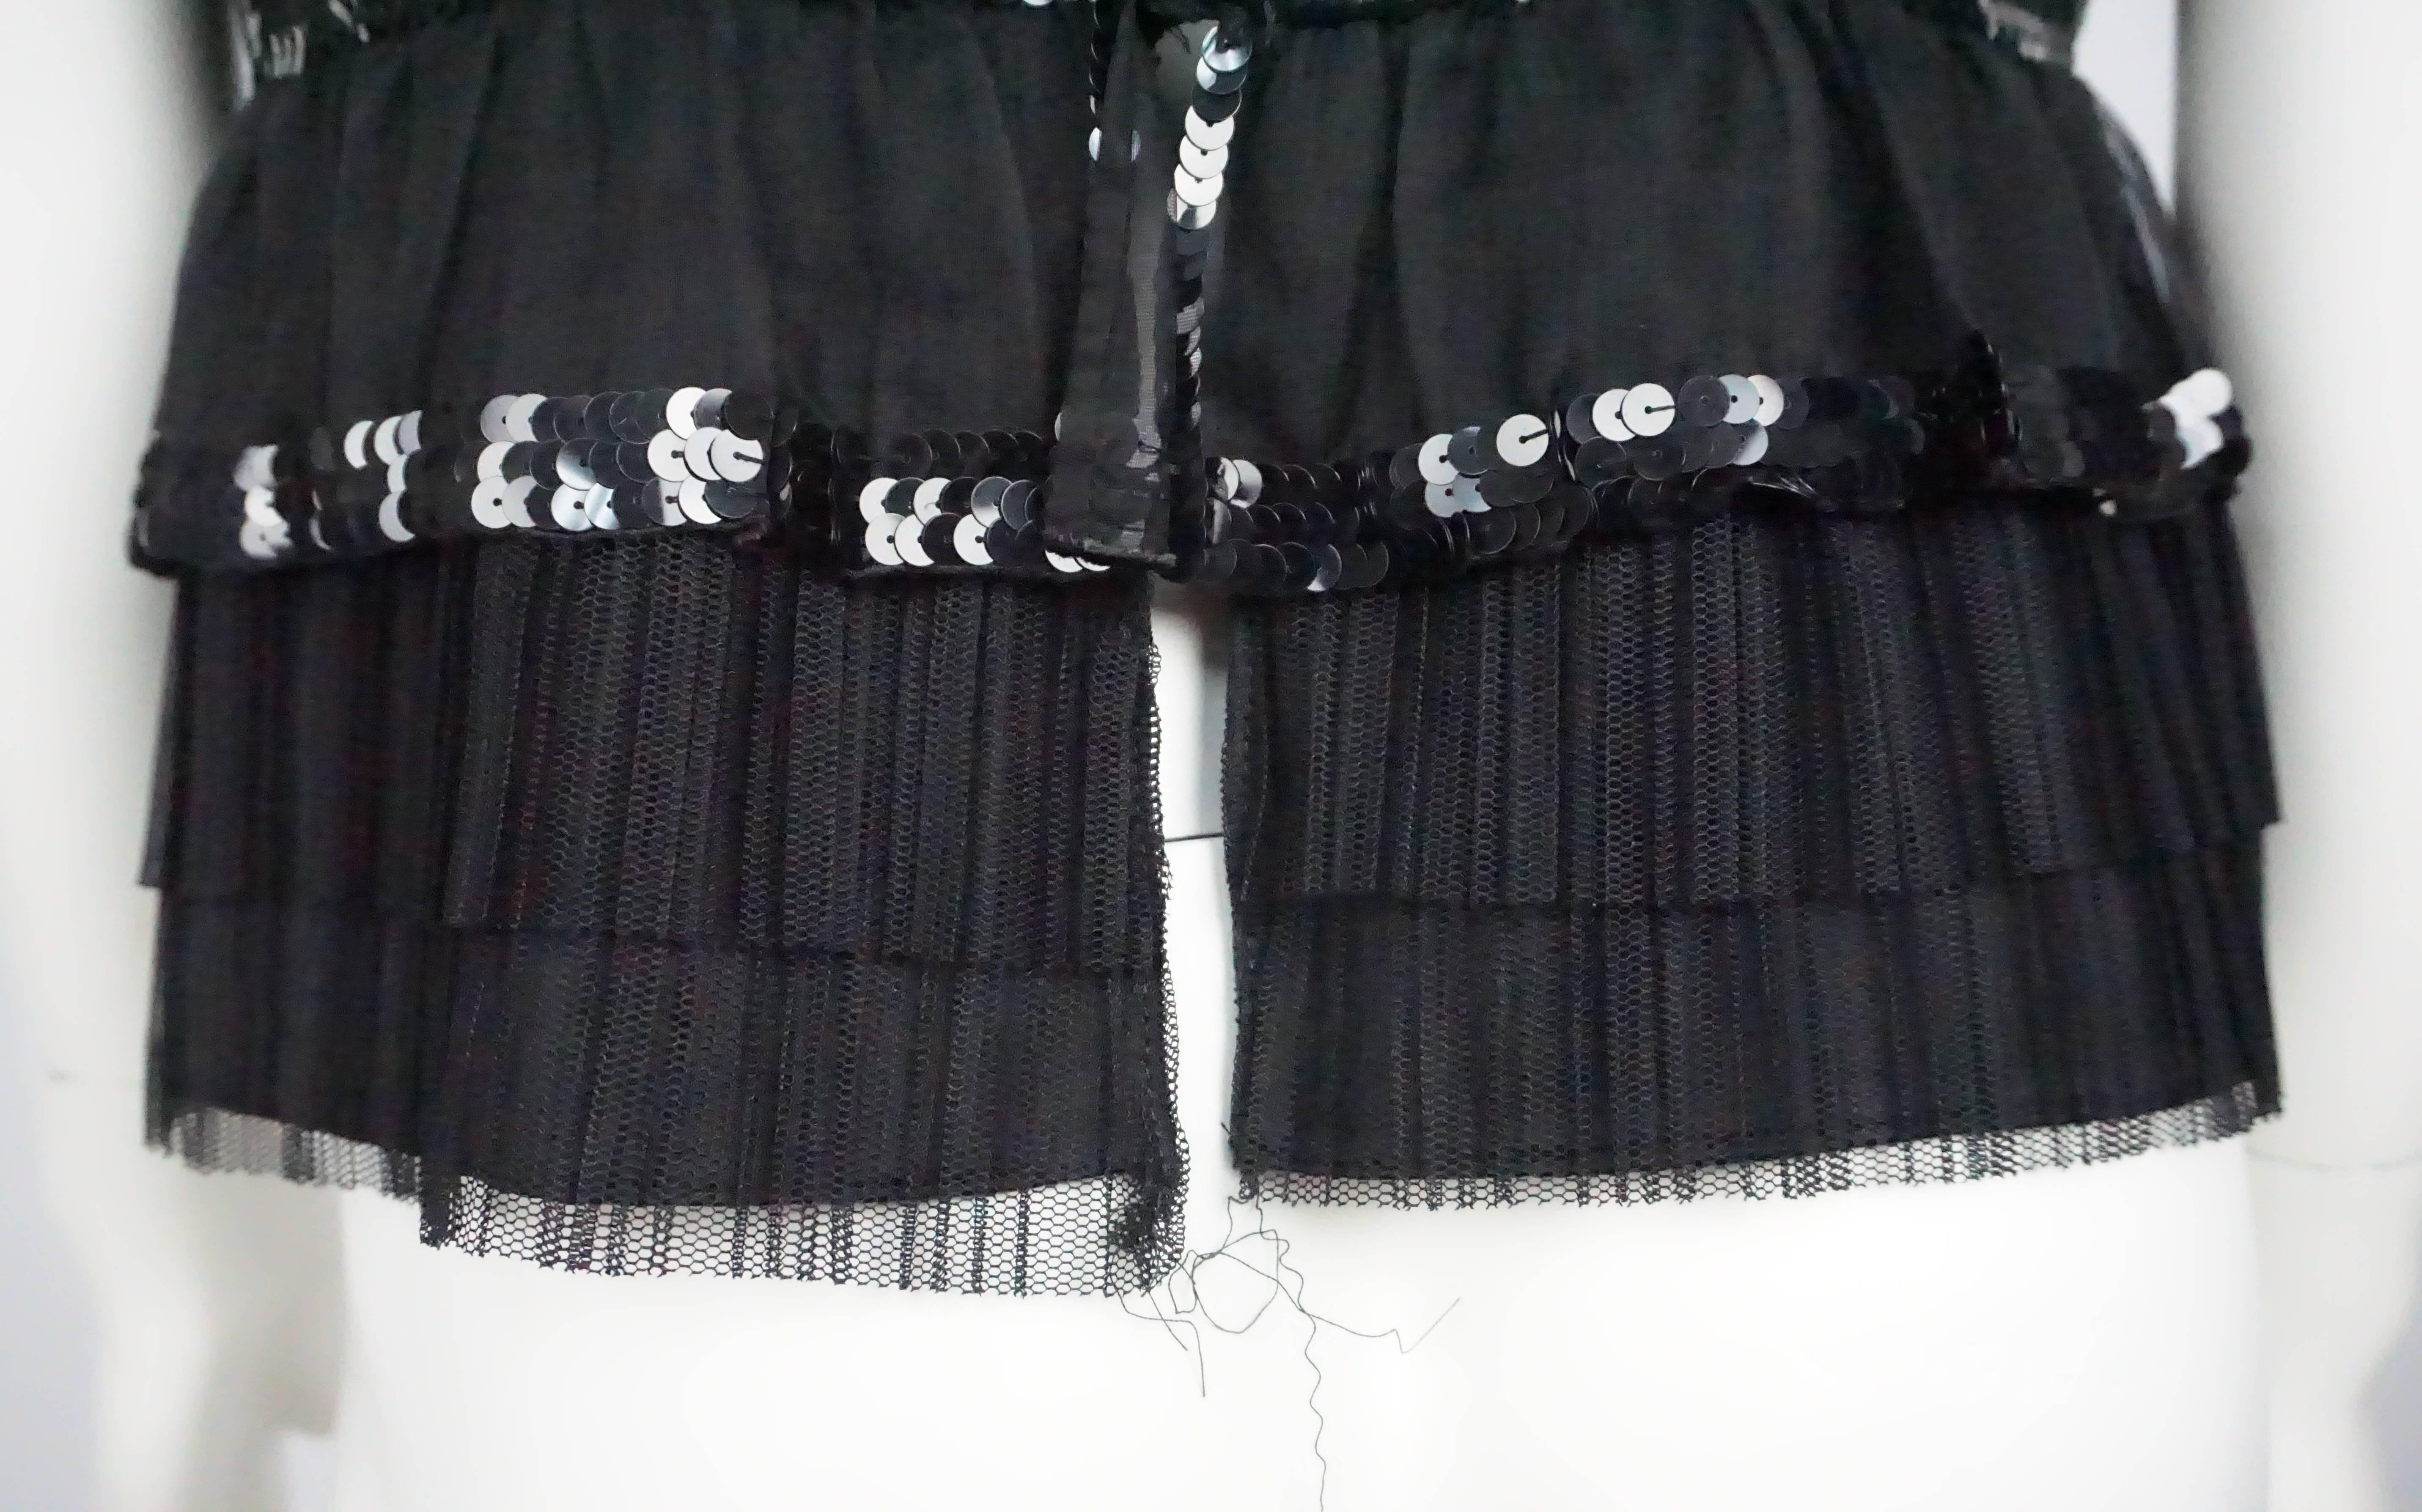 Chanel Black Silk Chiffon Sequin Sleeveless Top  In Excellent Condition For Sale In West Palm Beach, FL